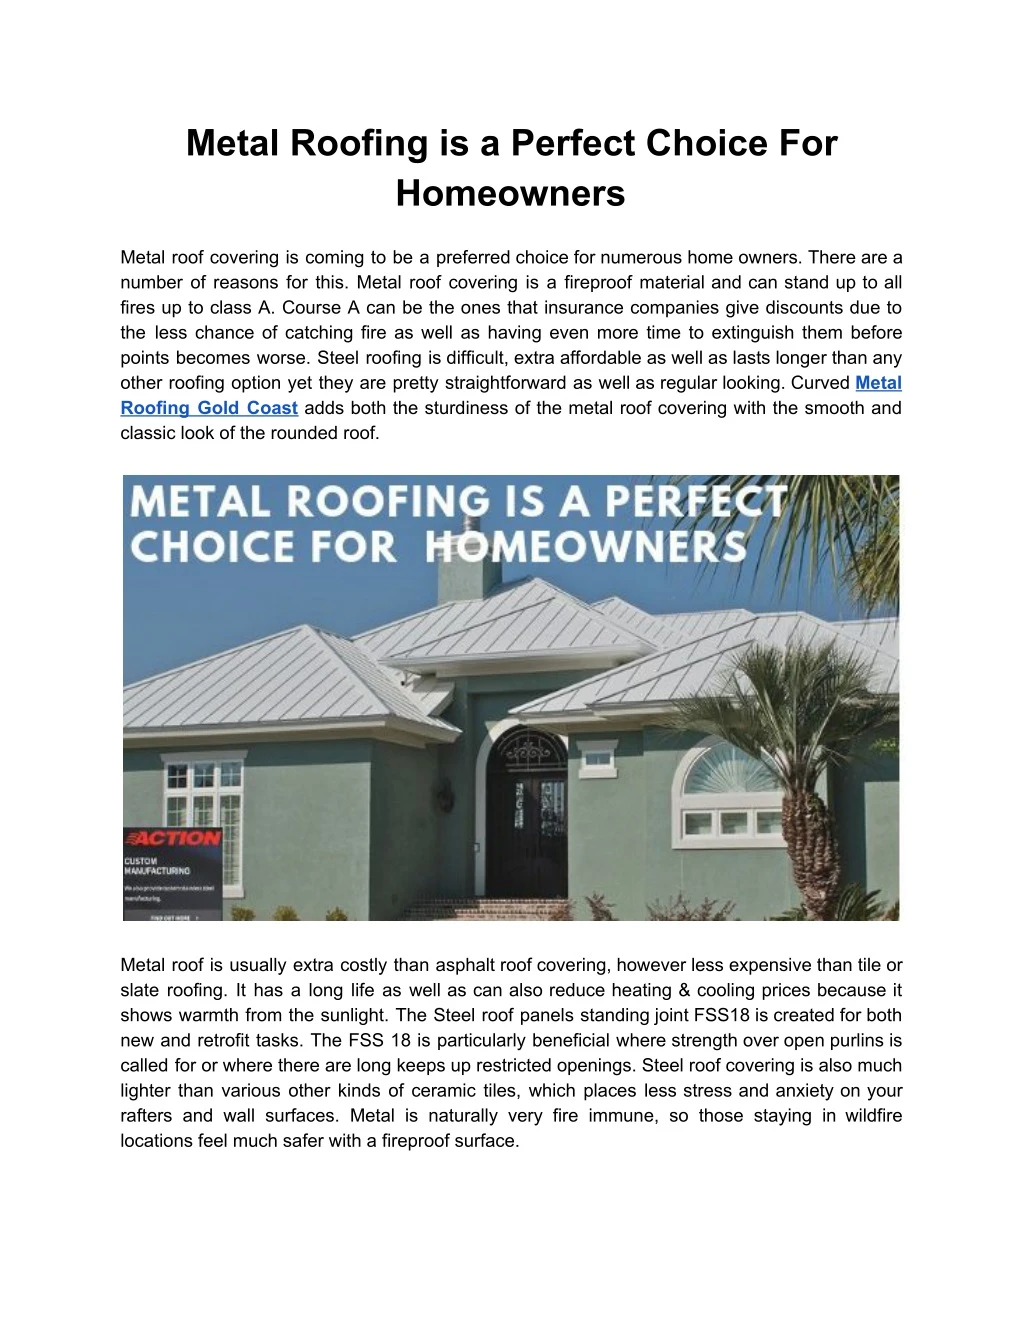 metal roofing is a perfect choice for homeowners